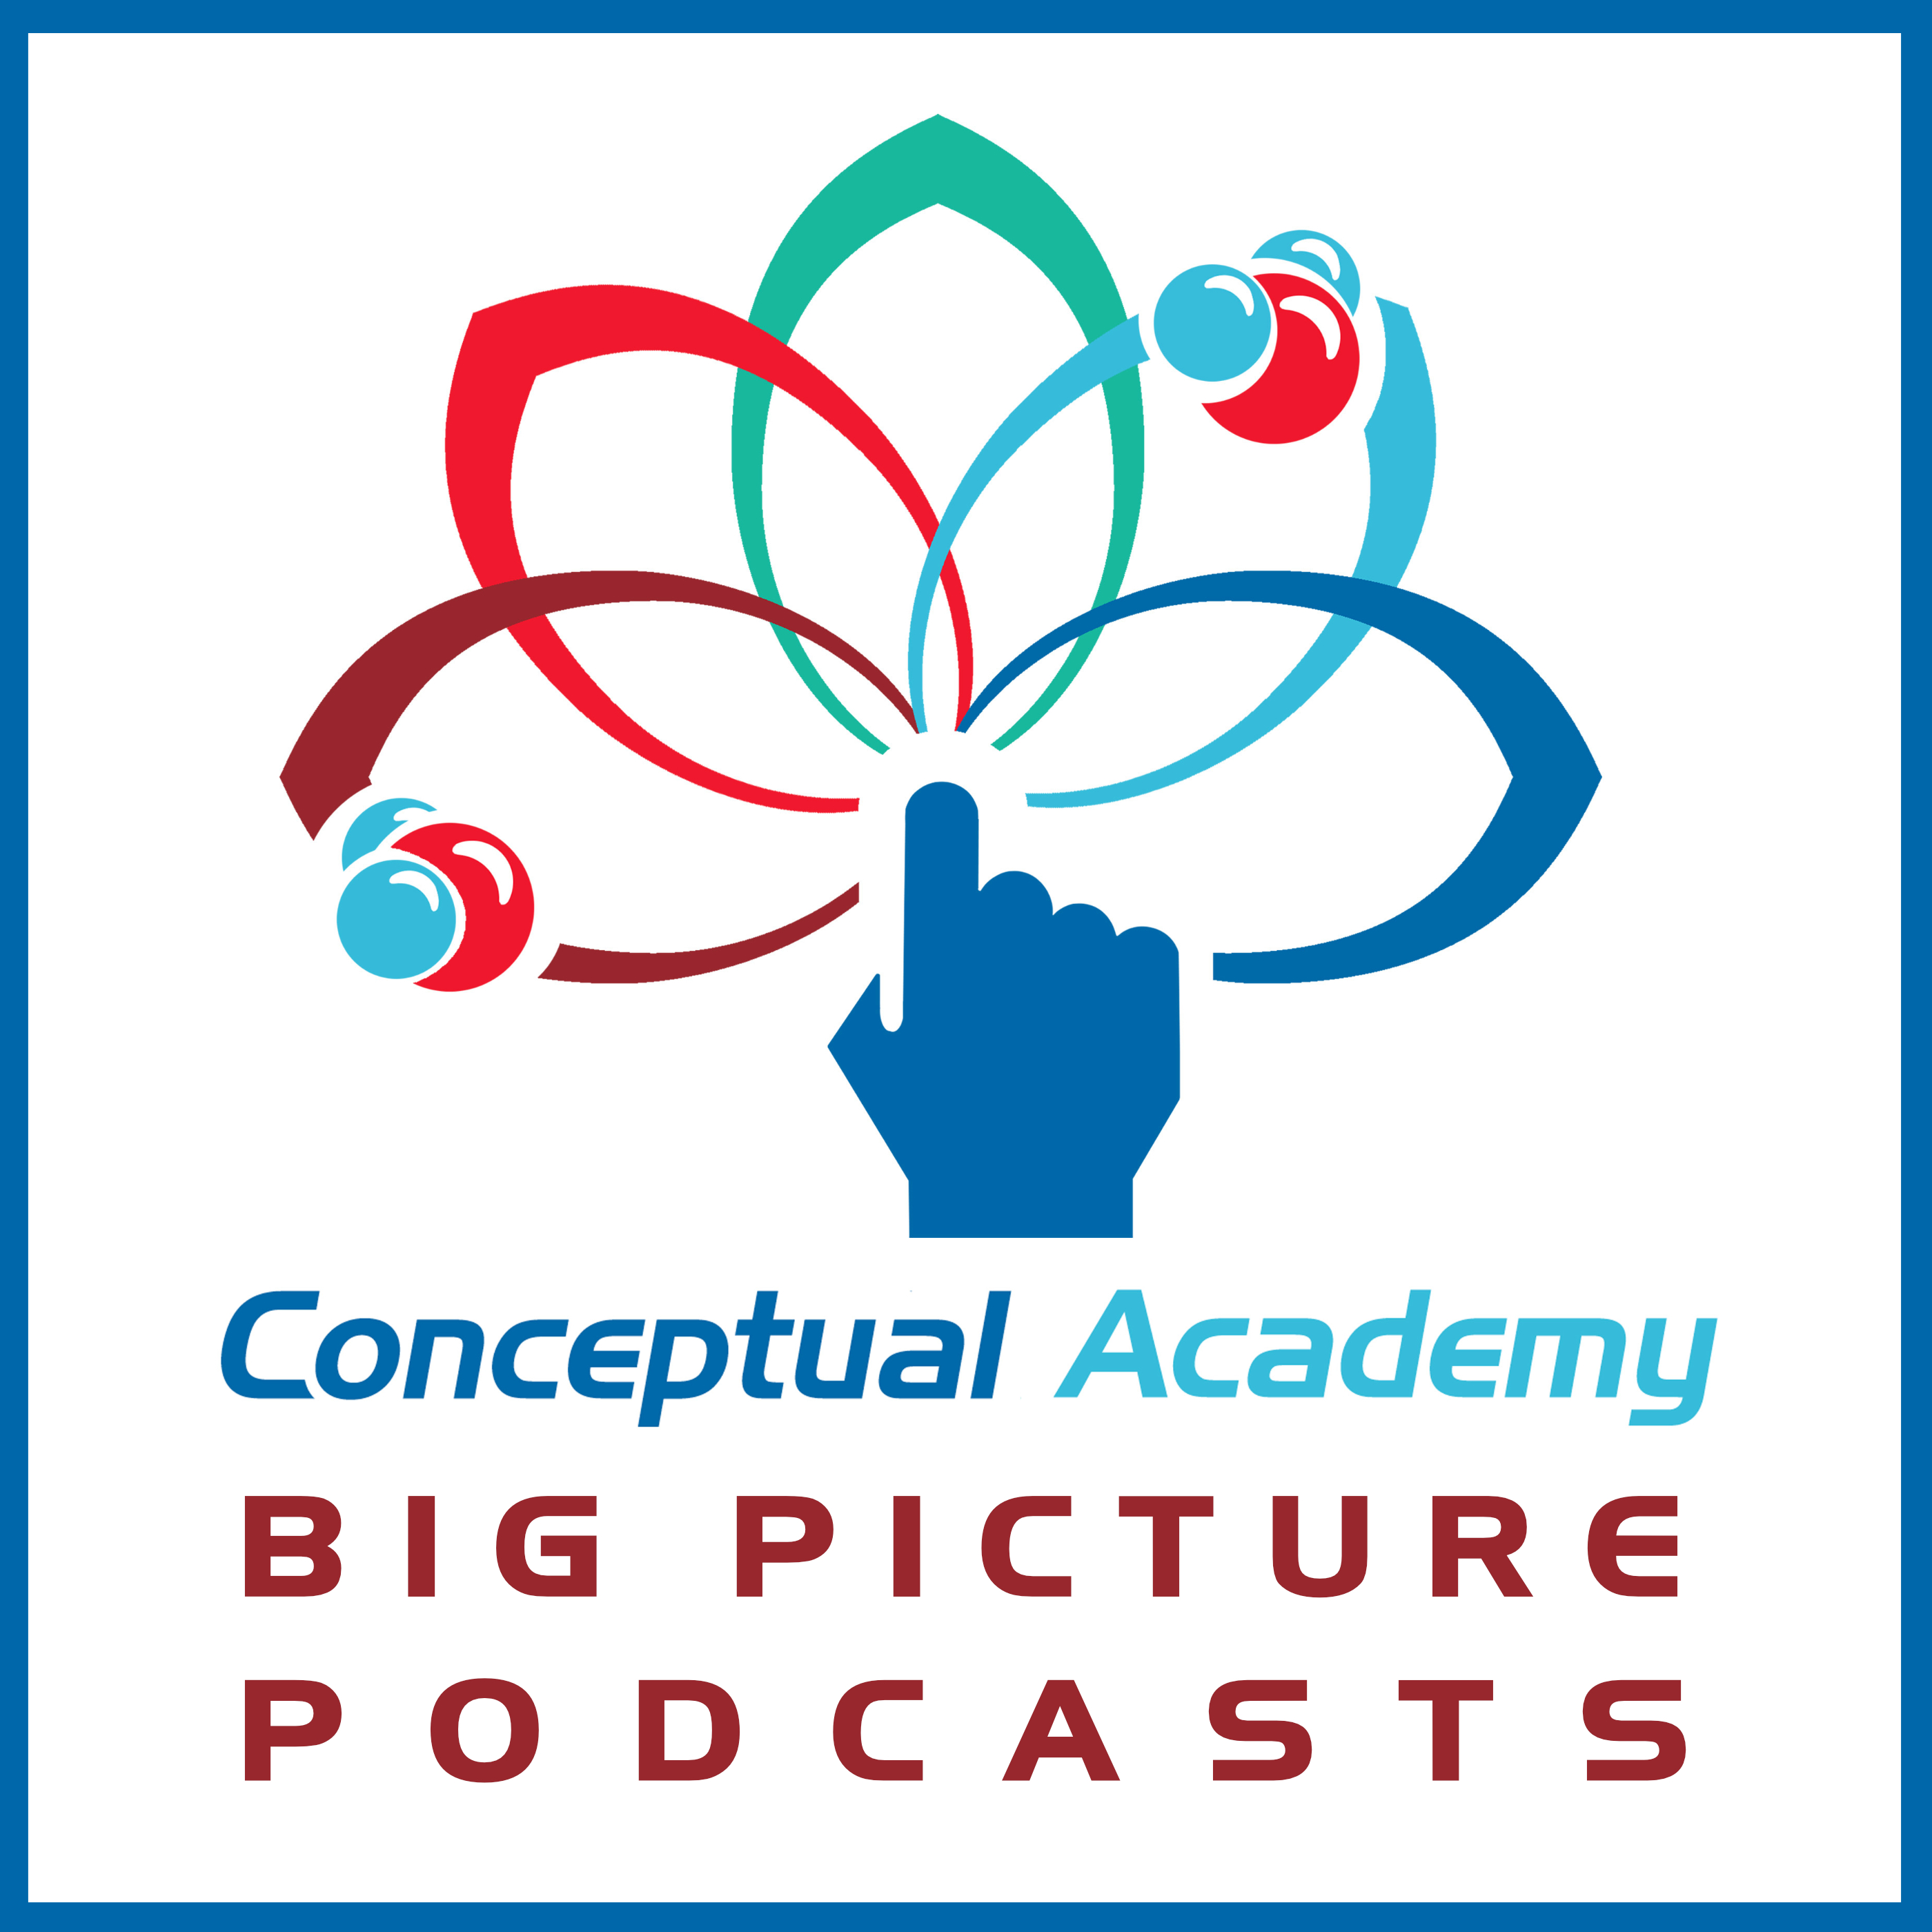 Chem 101: The Big Picture Podcast